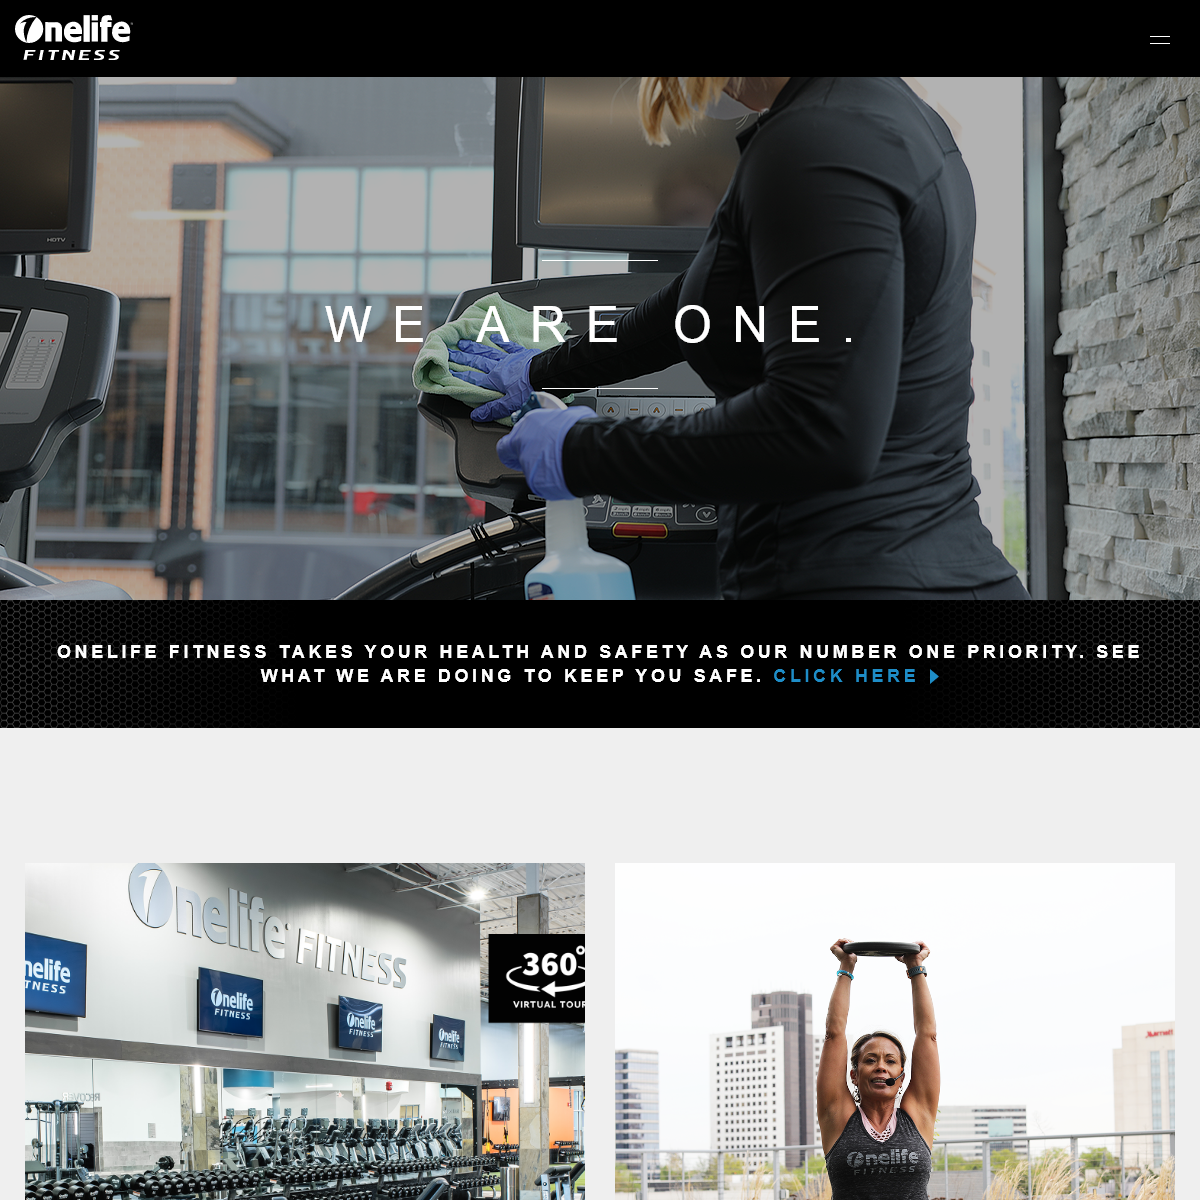 A complete backup of onelifefitness.com